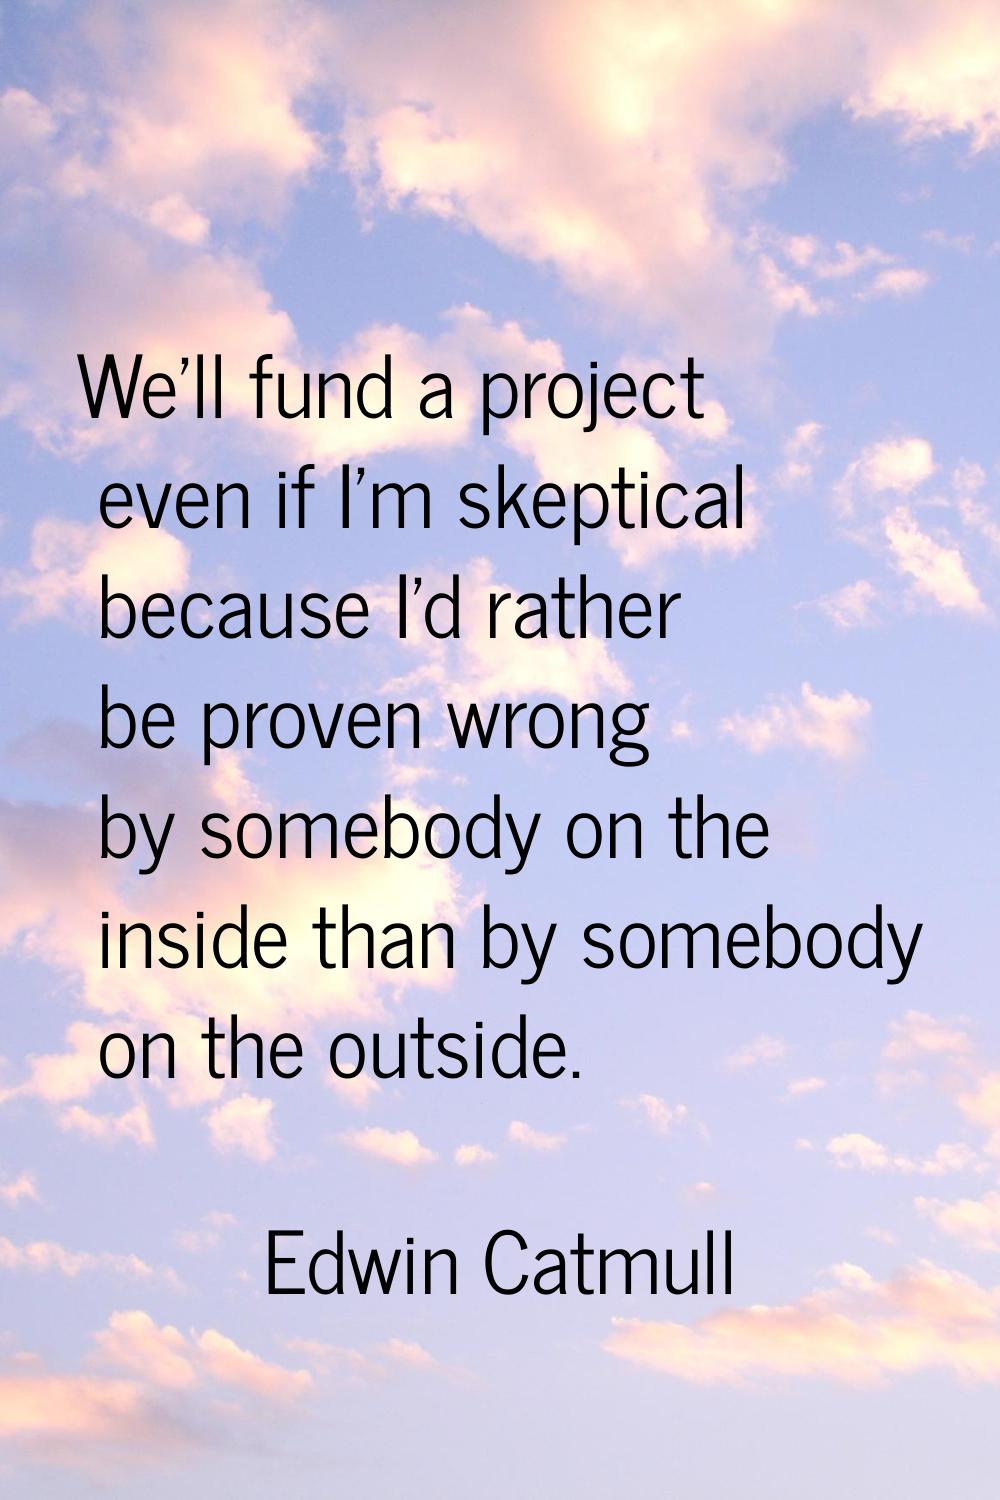 We'll fund a project even if I'm skeptical because I'd rather be proven wrong by somebody on the in